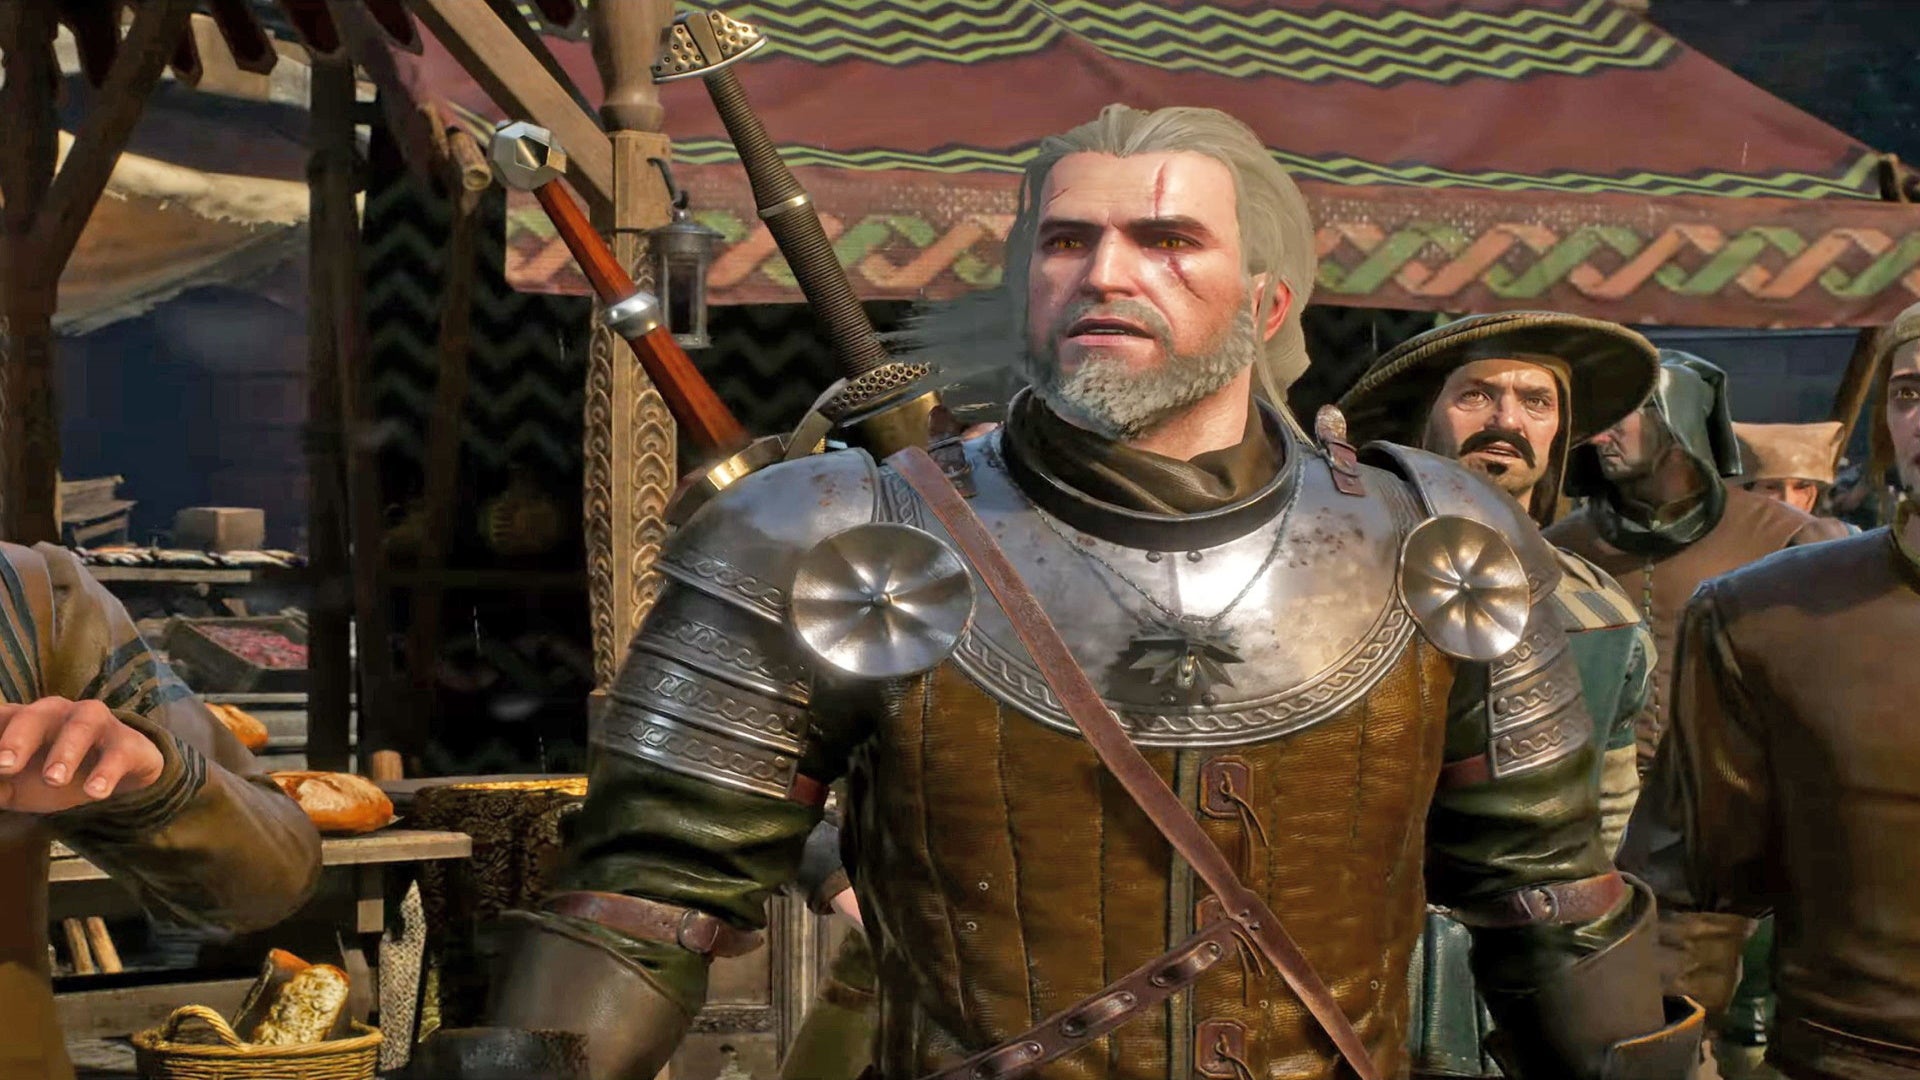 The Witcher 3 best abilities: A white man with shoulder-length grey hair and a short grey beard is standing in the middle of a busy marketplace, near a wooden stall selling bread. He's wearing plate mail on his shoulders and a leather jerkin underneath